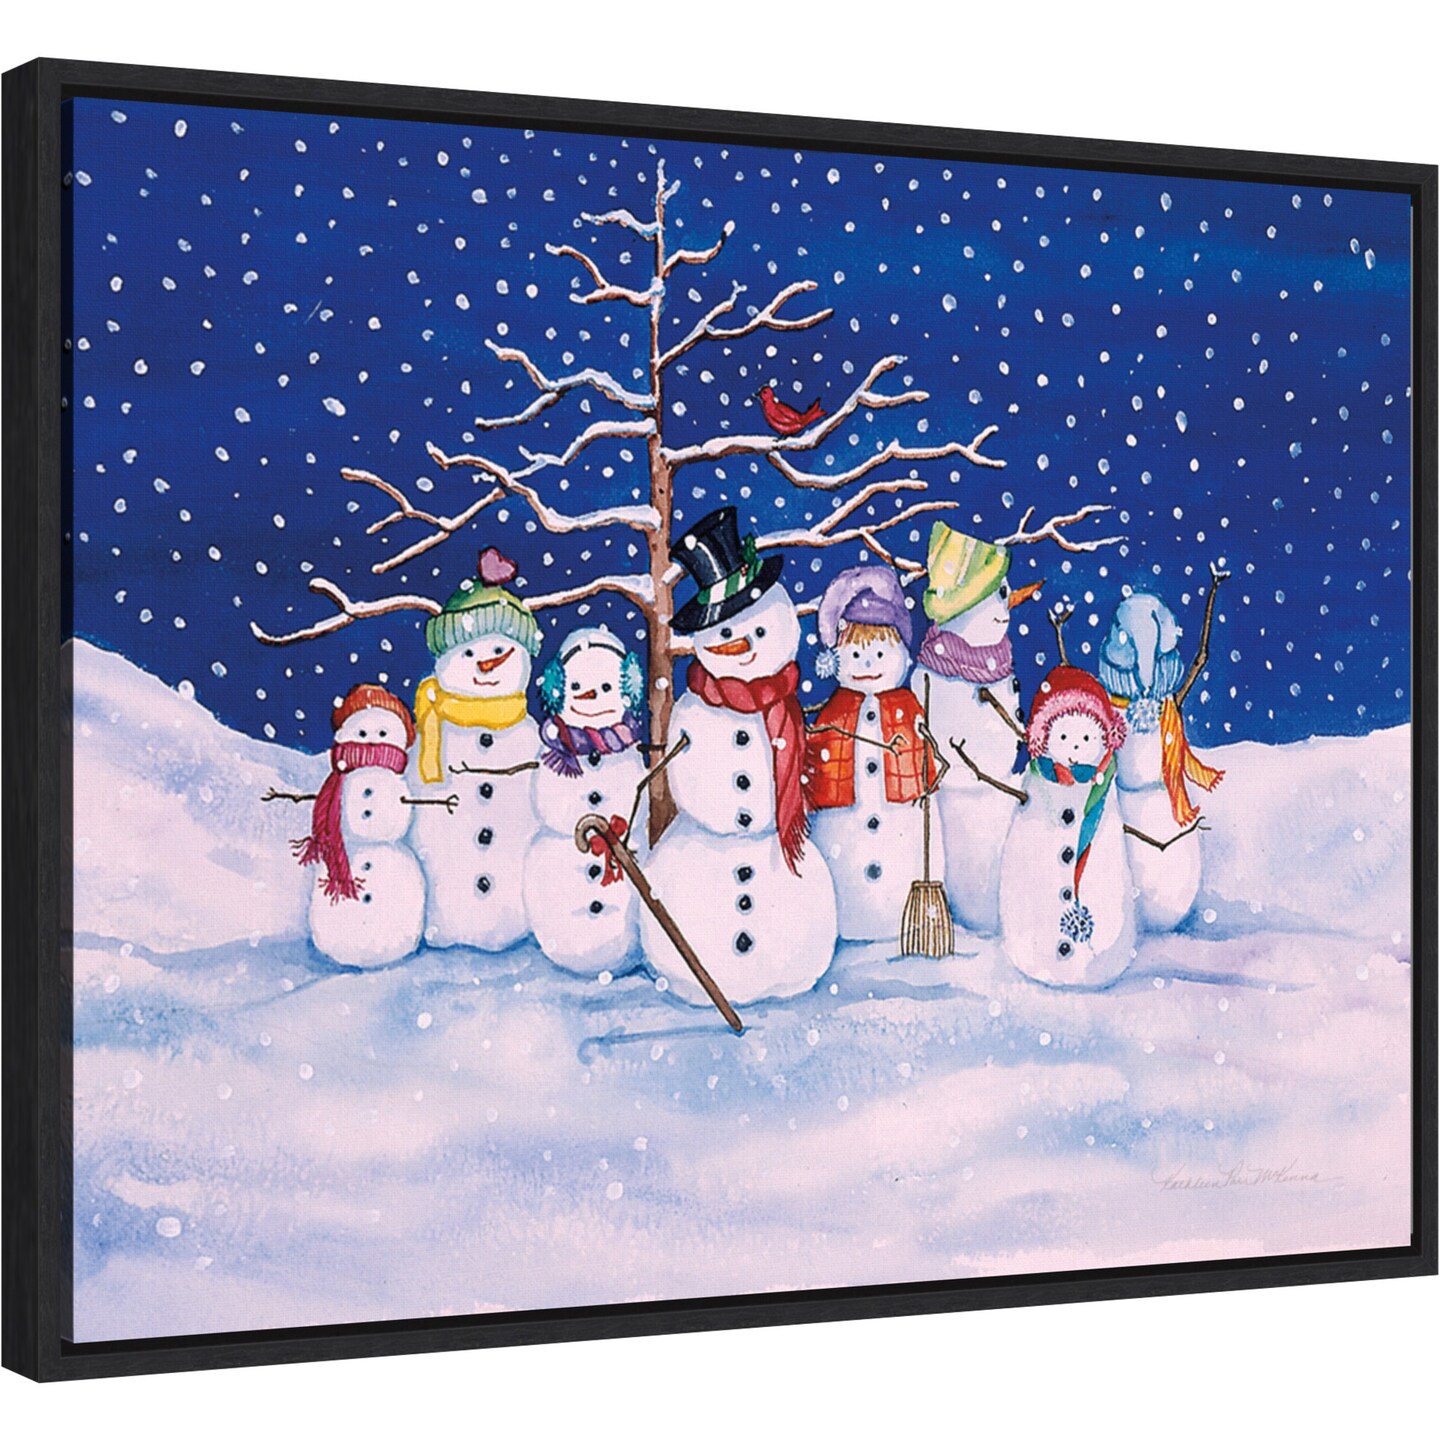 Snow Family by Kathleen Parr McKenna 24-in. W x 18-in. H. Canvas Wall Art Print Framed in Black